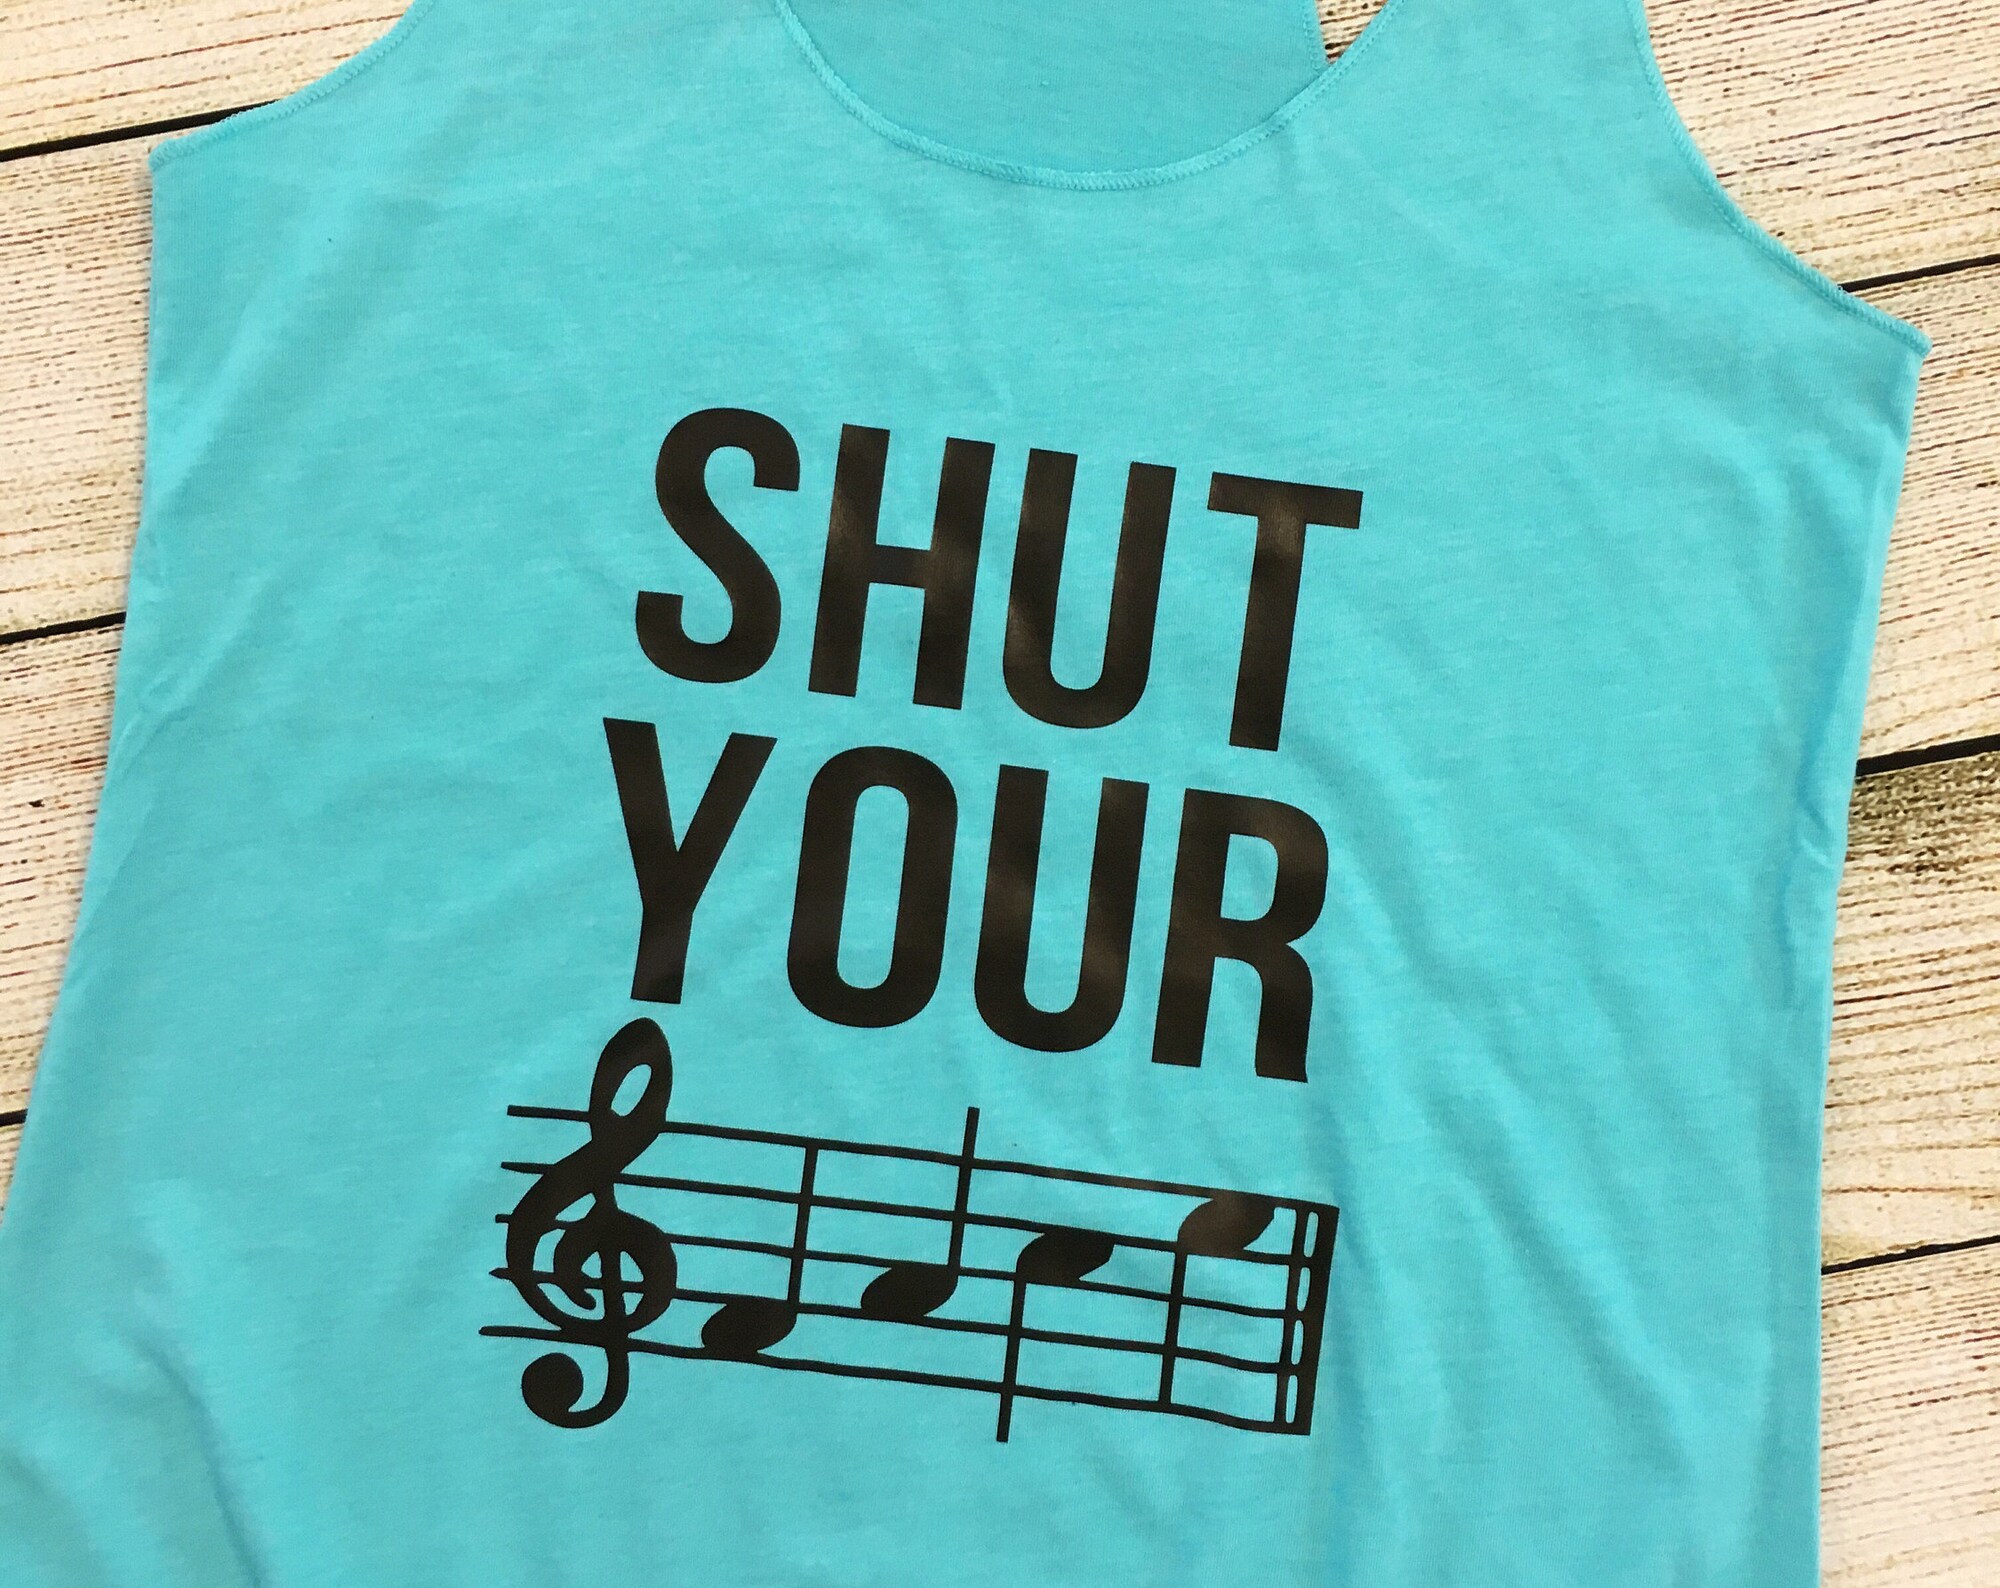 Shut Your FACE musical notes tank top